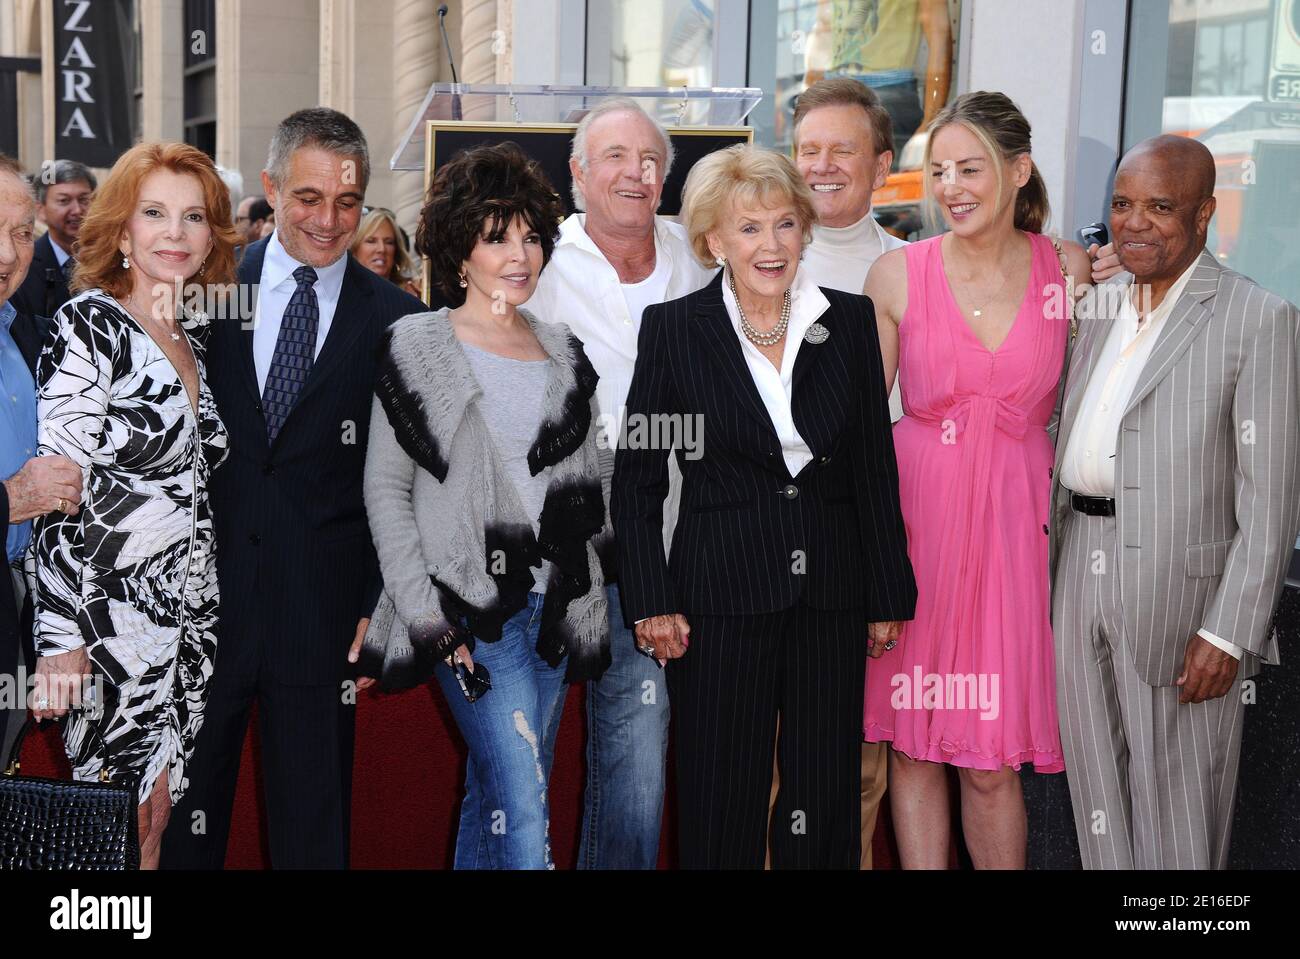 Tony Danza, Carol Bayer Sager, James Caan, Sharon Stone and Berry Gordy  attend the ceremony where Jane Morgan is honored with a Star on the  Hollywood Walk of Fame. Los Angeles, CA,